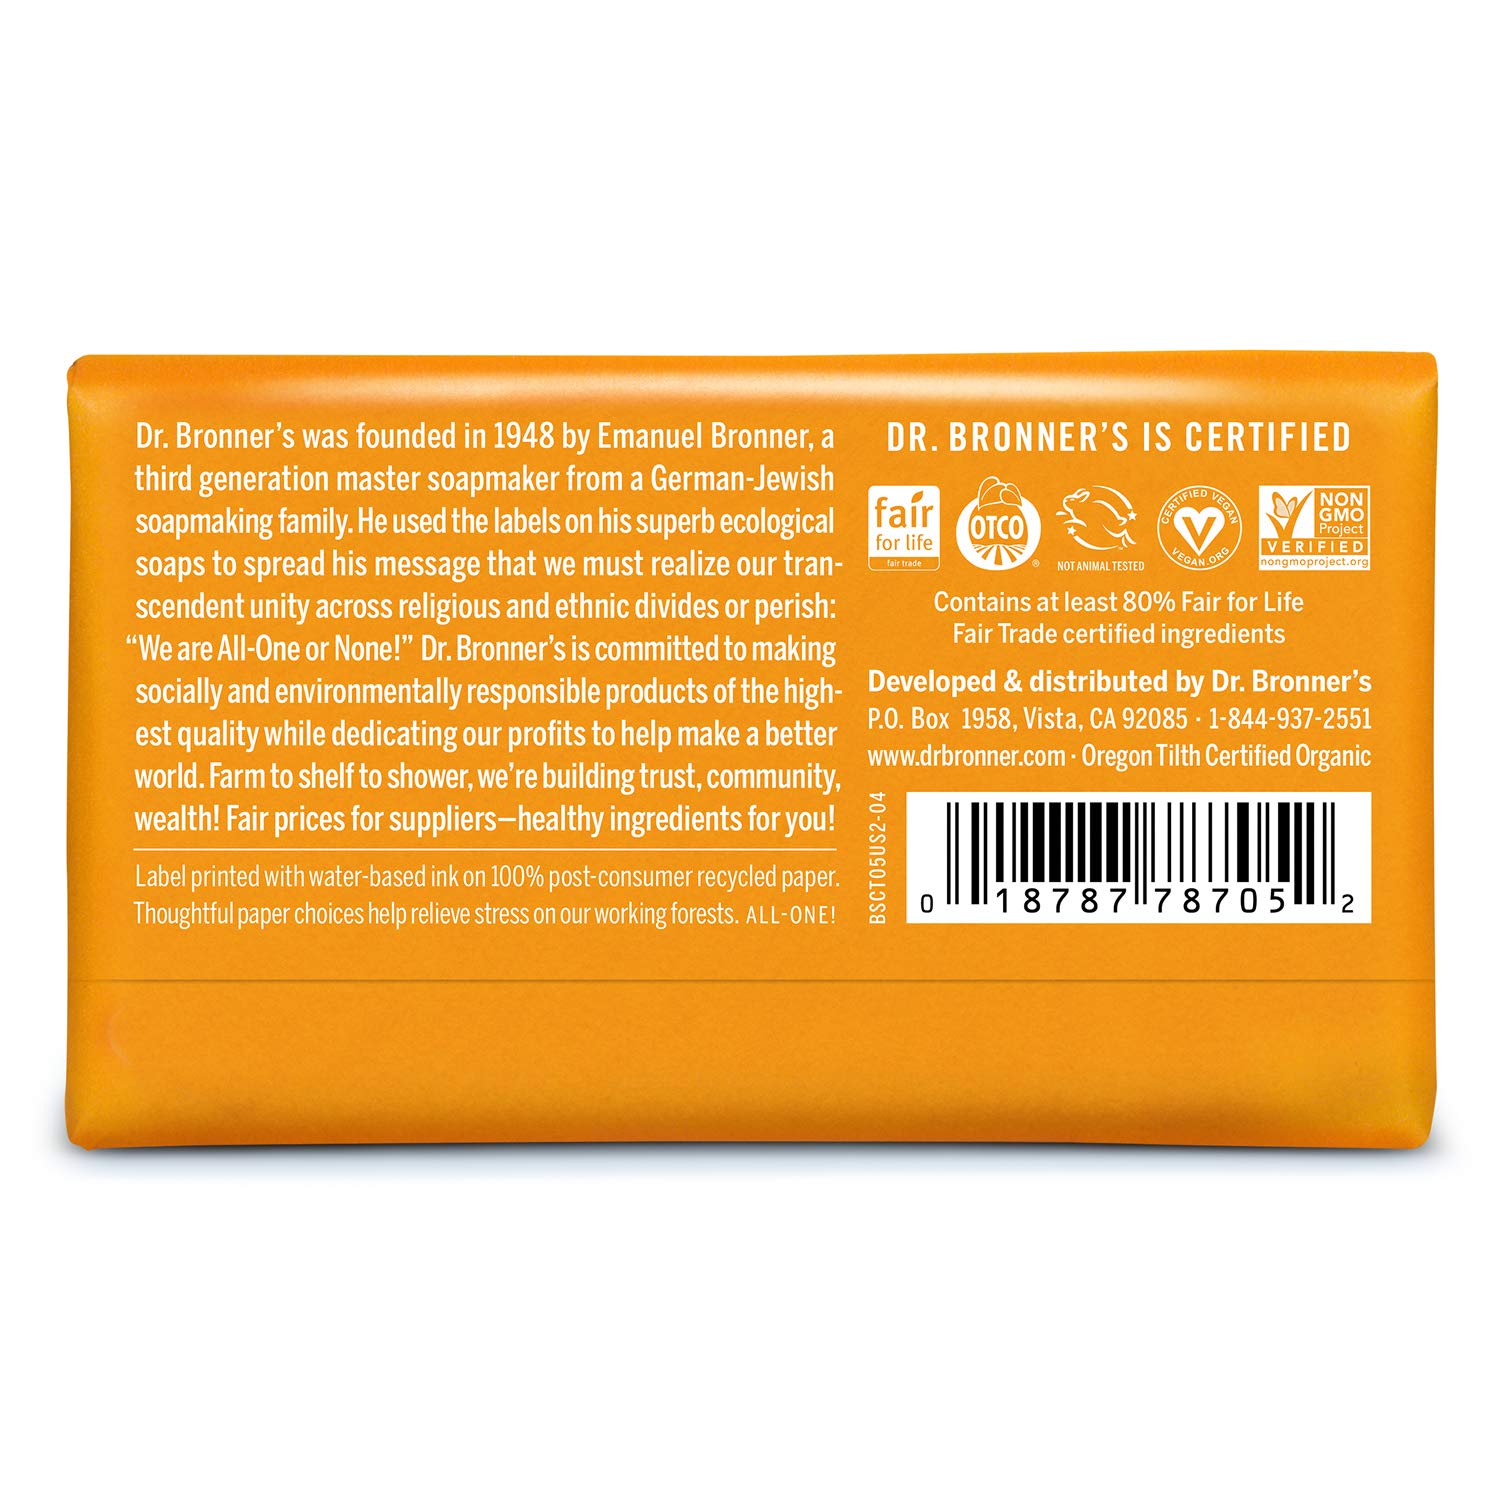 Dr. Bronner’s - Pure-Castile Bar Soap (Citrus, 5 ounce) - Made with Organic Oils, For Face, Body and Hair, Gentle and Moisturizing, Biodegradable, Vegan, Cruelty-free, Non-GMO